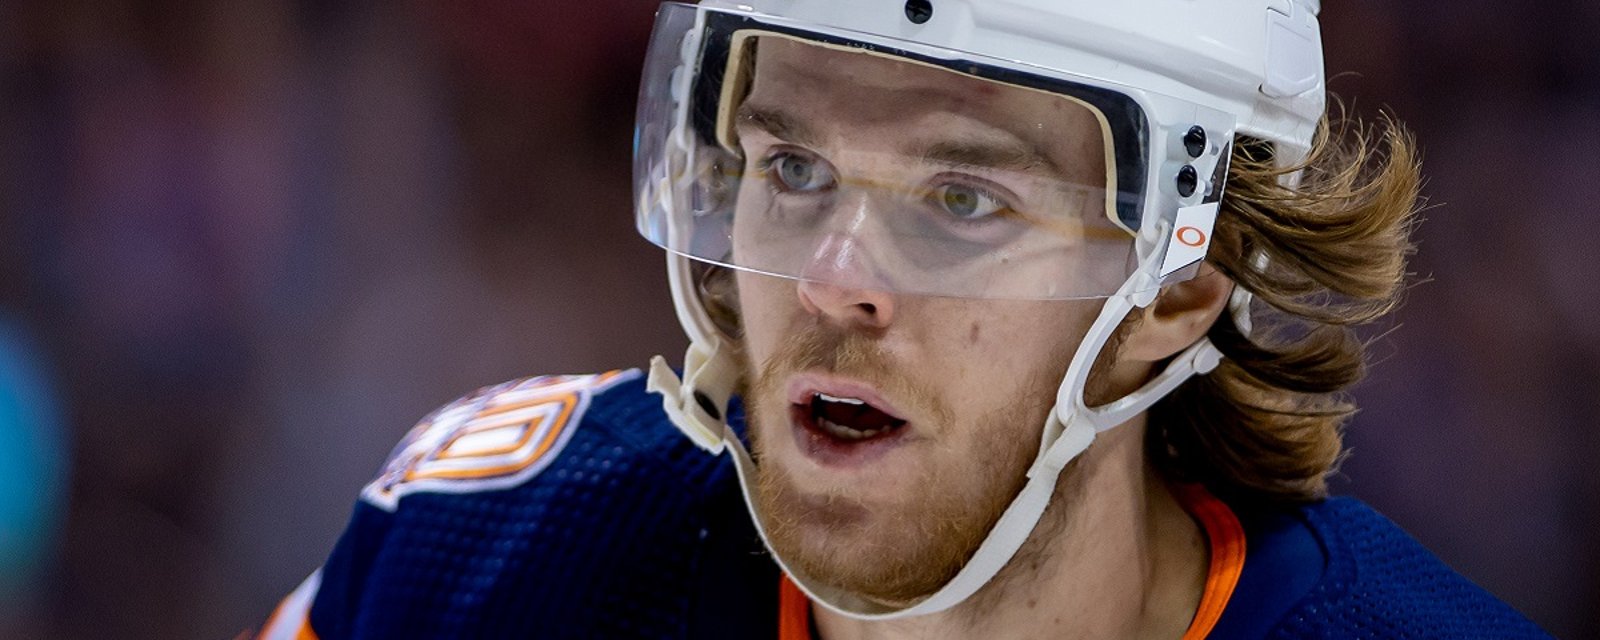 Connor McDavid has lost in the fastest skater challenge to an Oilers teammate.